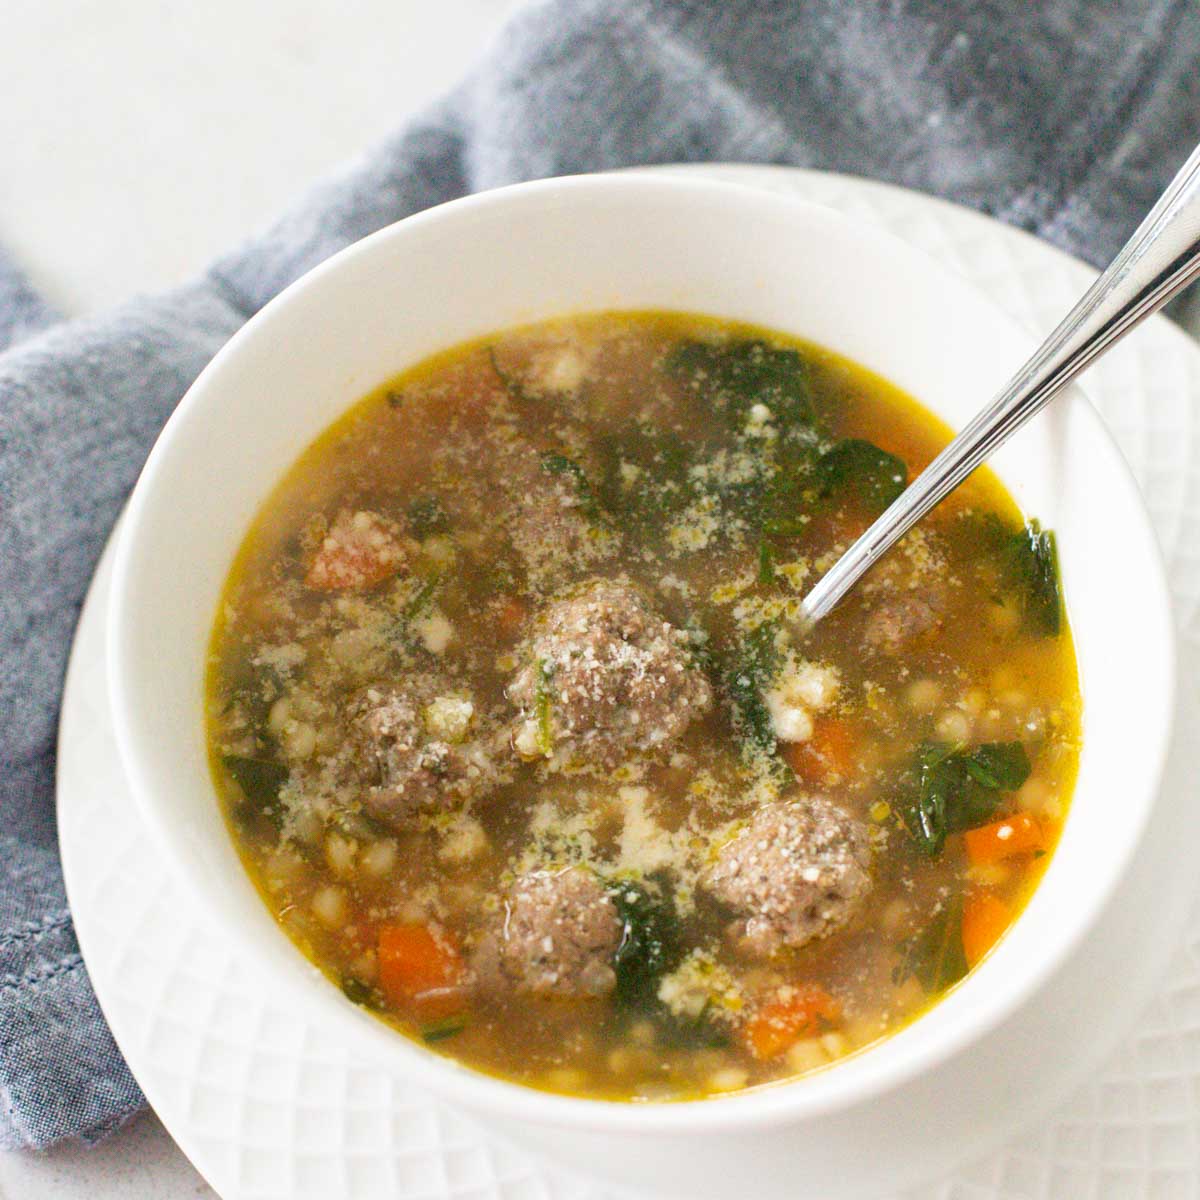 A bowl of soup has meatballs, couscous, and carrots with spinach in chicken broth.